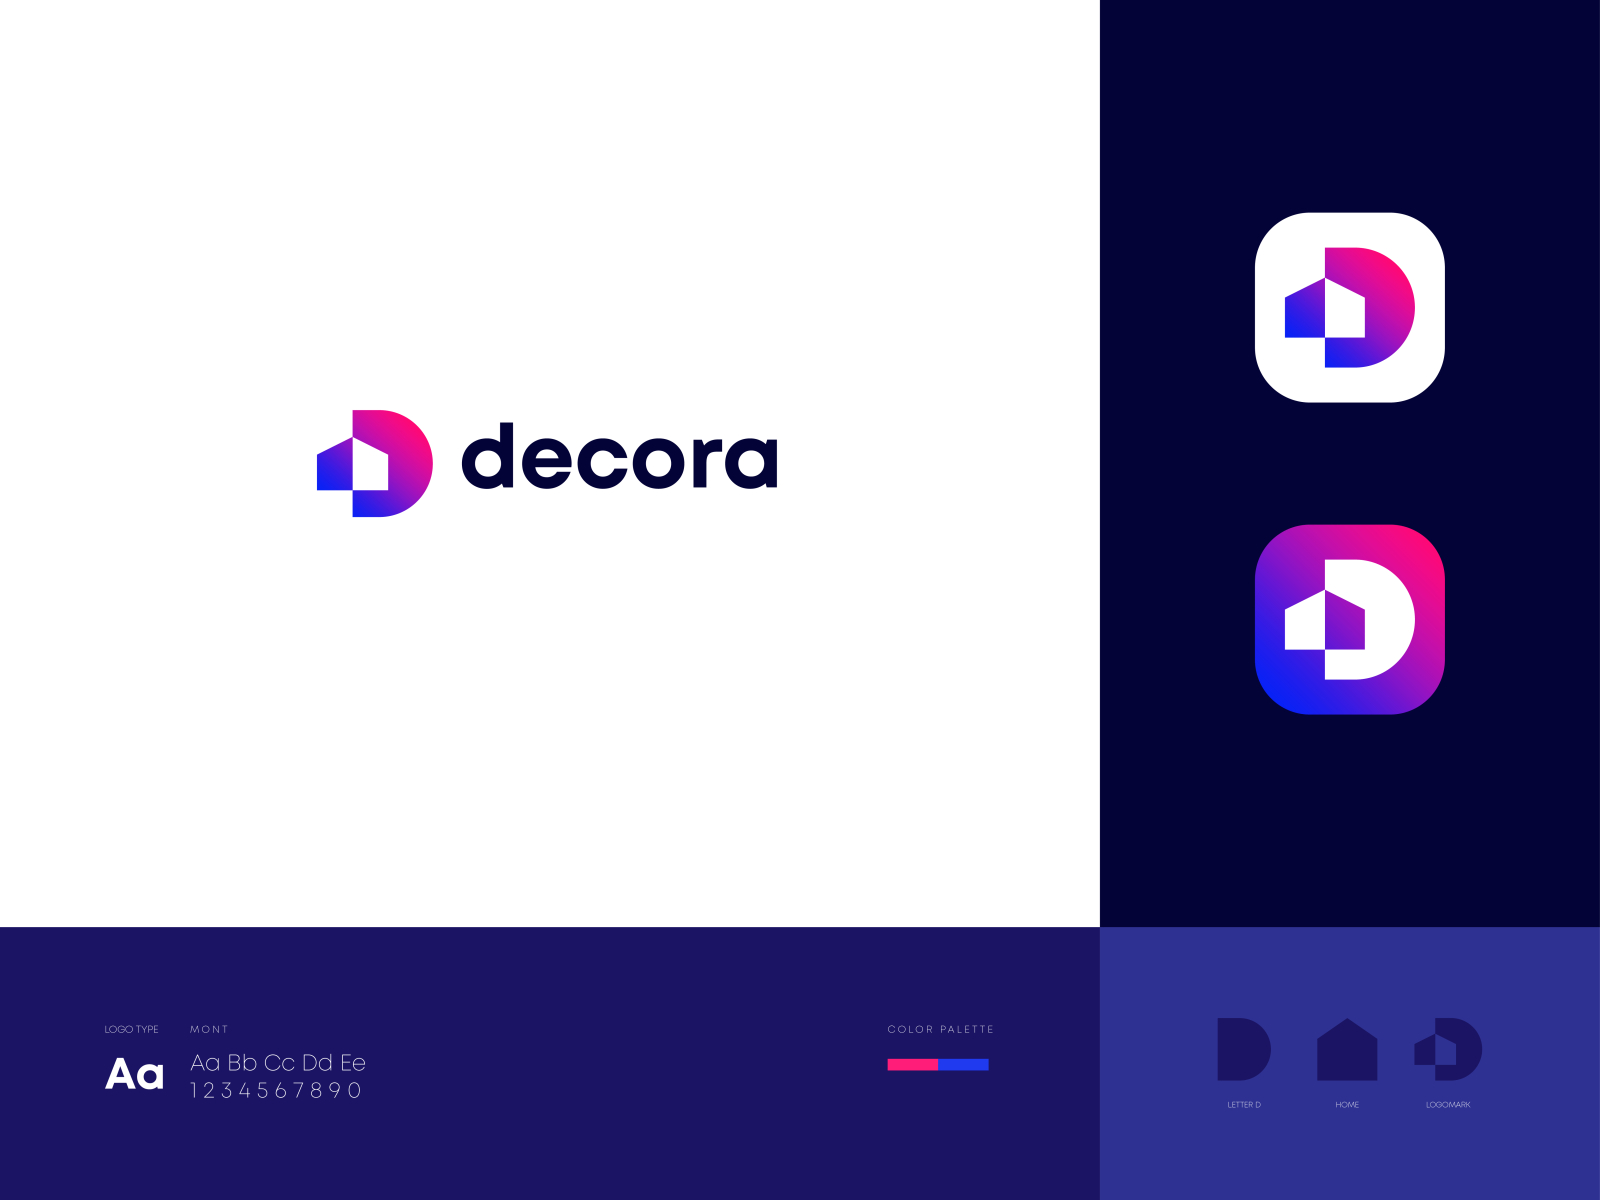 D + Home Logo Design by Sumon Yousuf on Dribbble